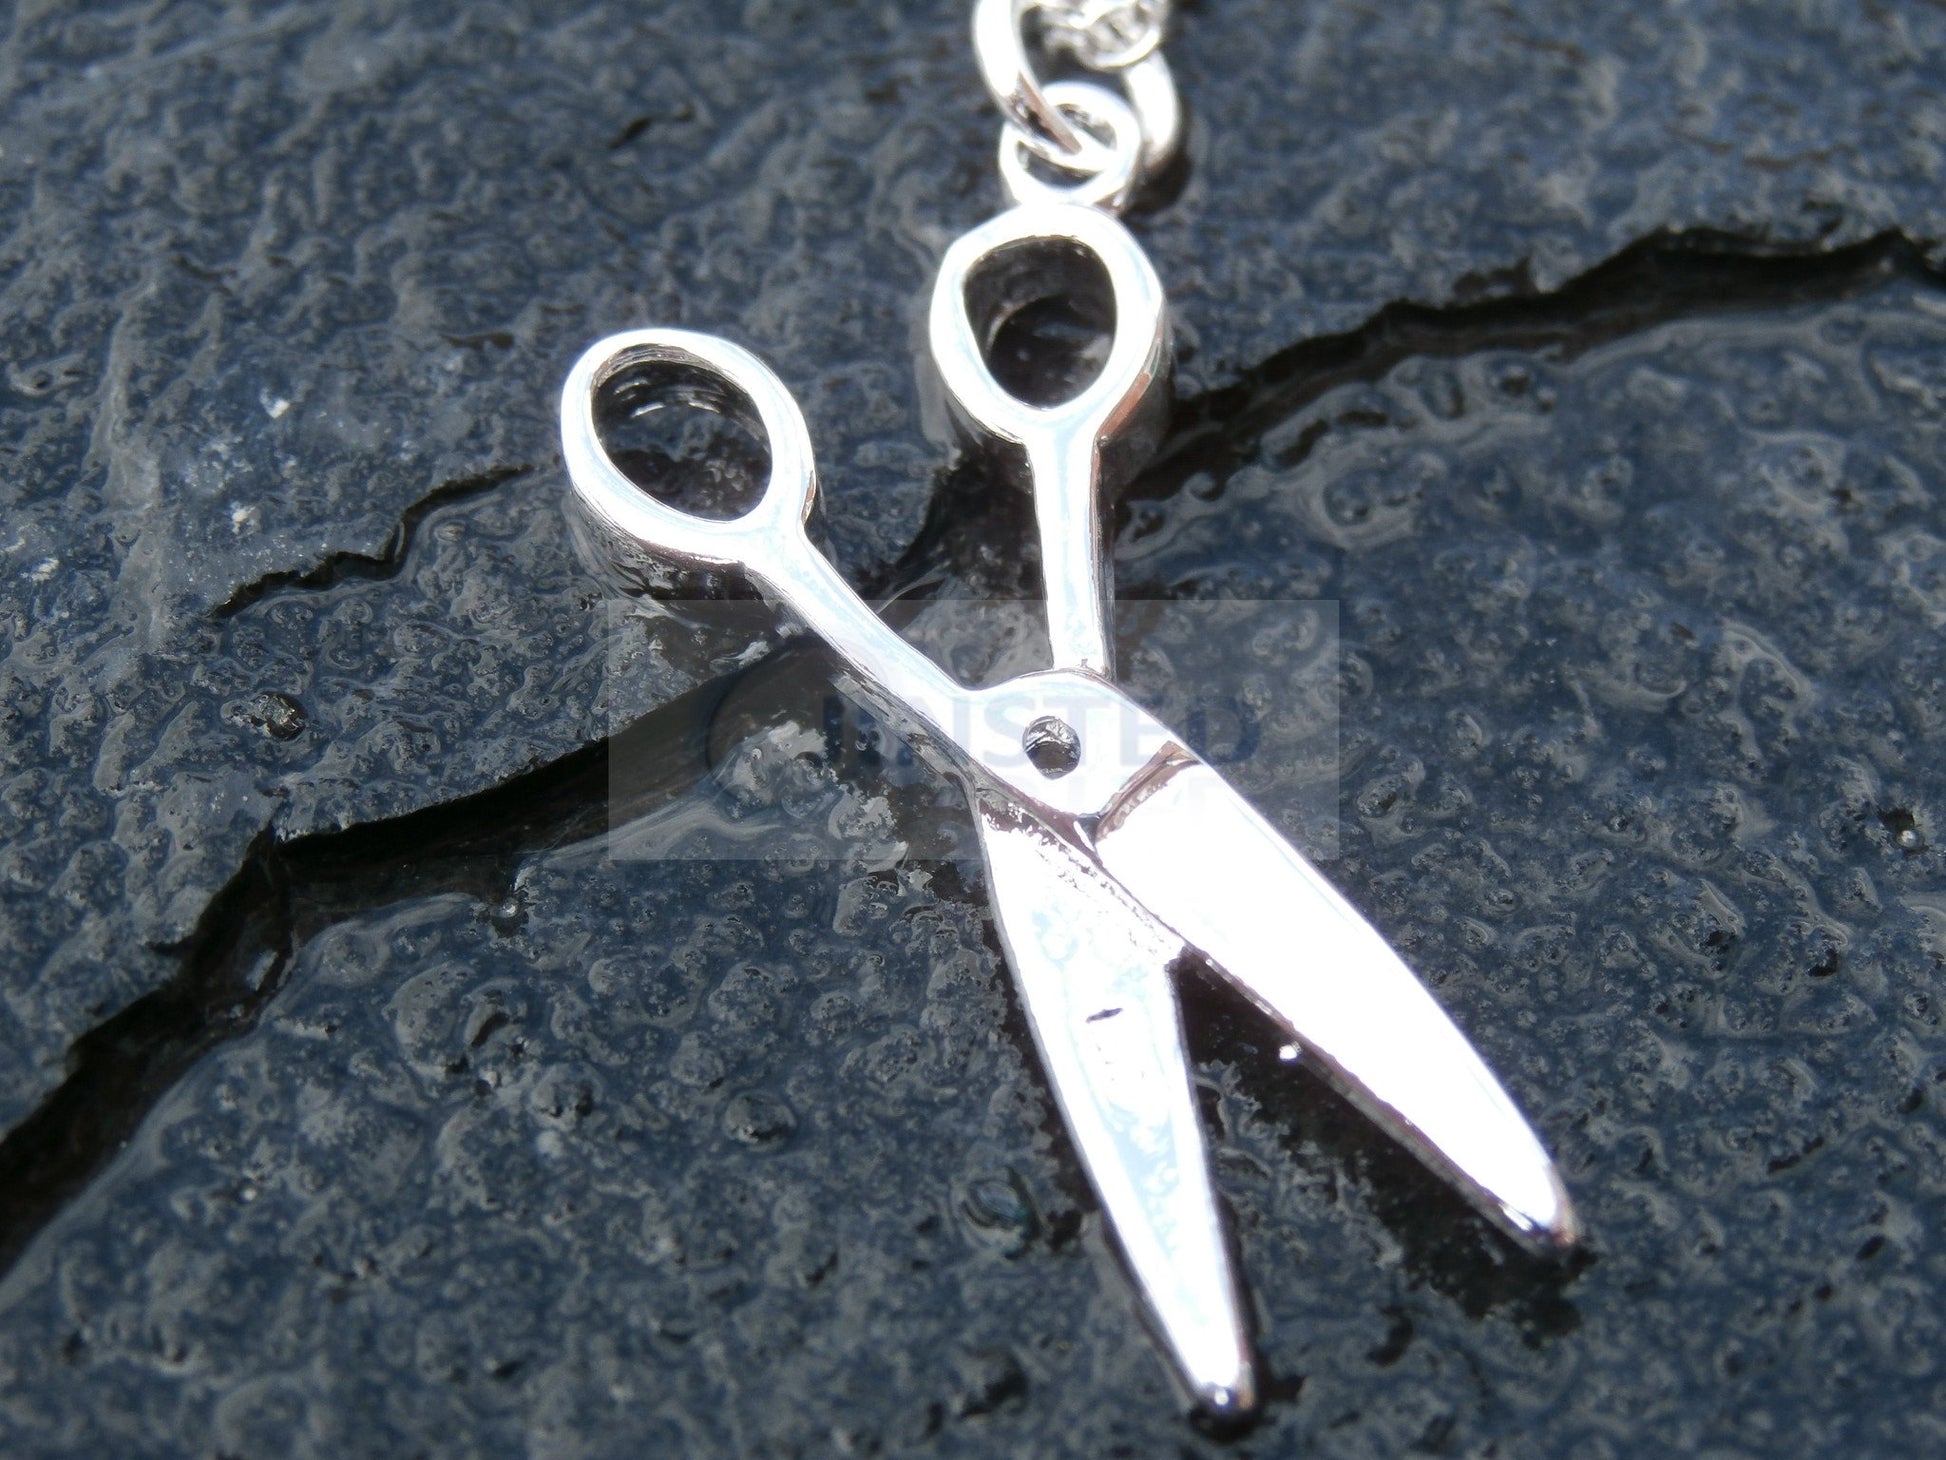 Ladies Jewellery, Silver Necklace with Pair of Scissors Pendant, Jinsted